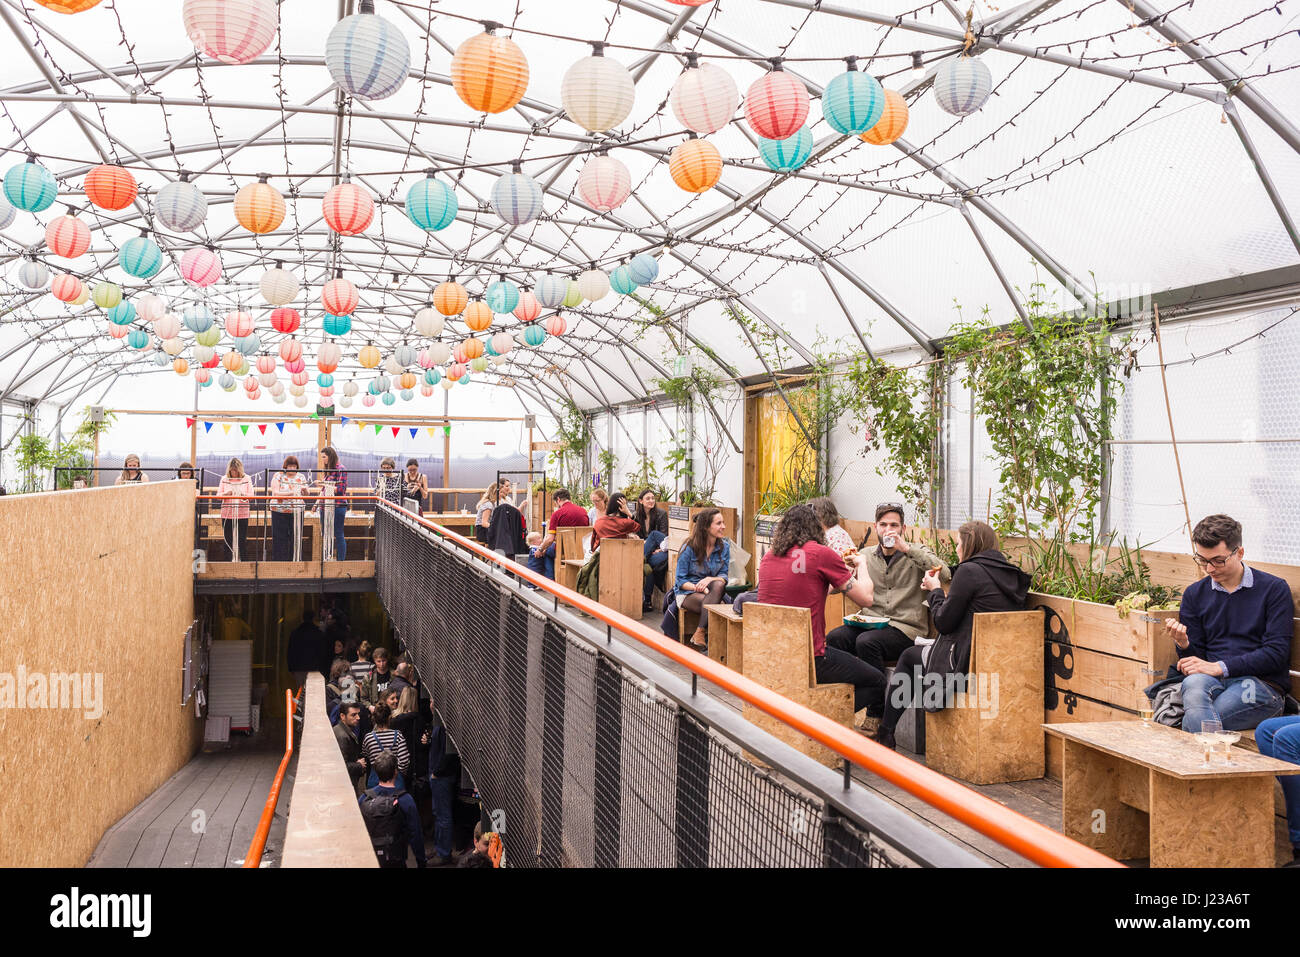 People eating and drinking in the The Greenhouse, a large covered polytunnel in Pop Brixton.Pop Brixton is an event venue and the home of a community  Stock Photo